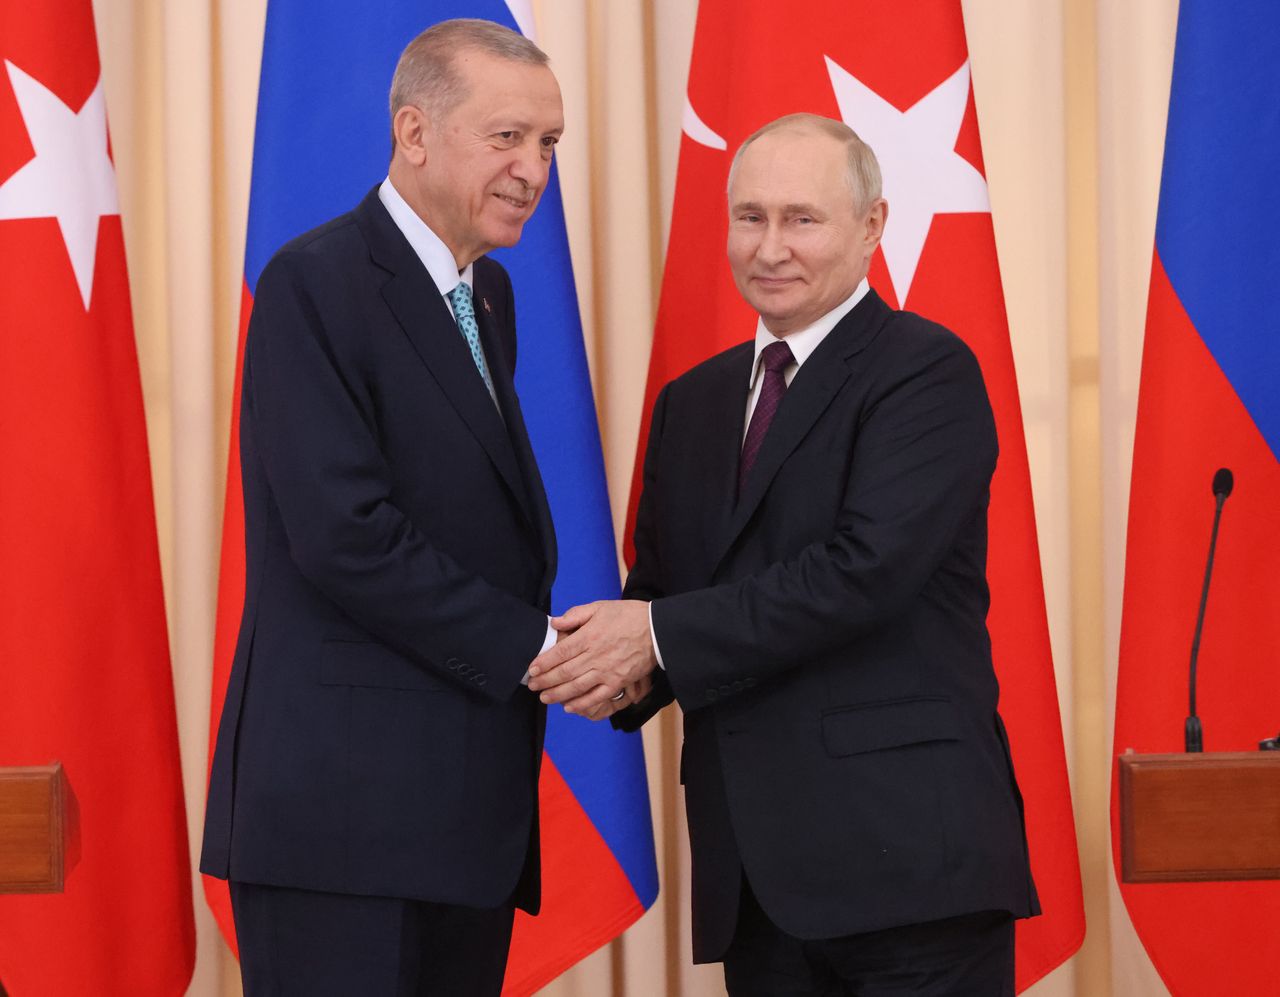 The President of the Russian Federation, Vladimir Putin, will meet again with Recep Tayyip Erdogan, the leader of Turkey, on February 12.